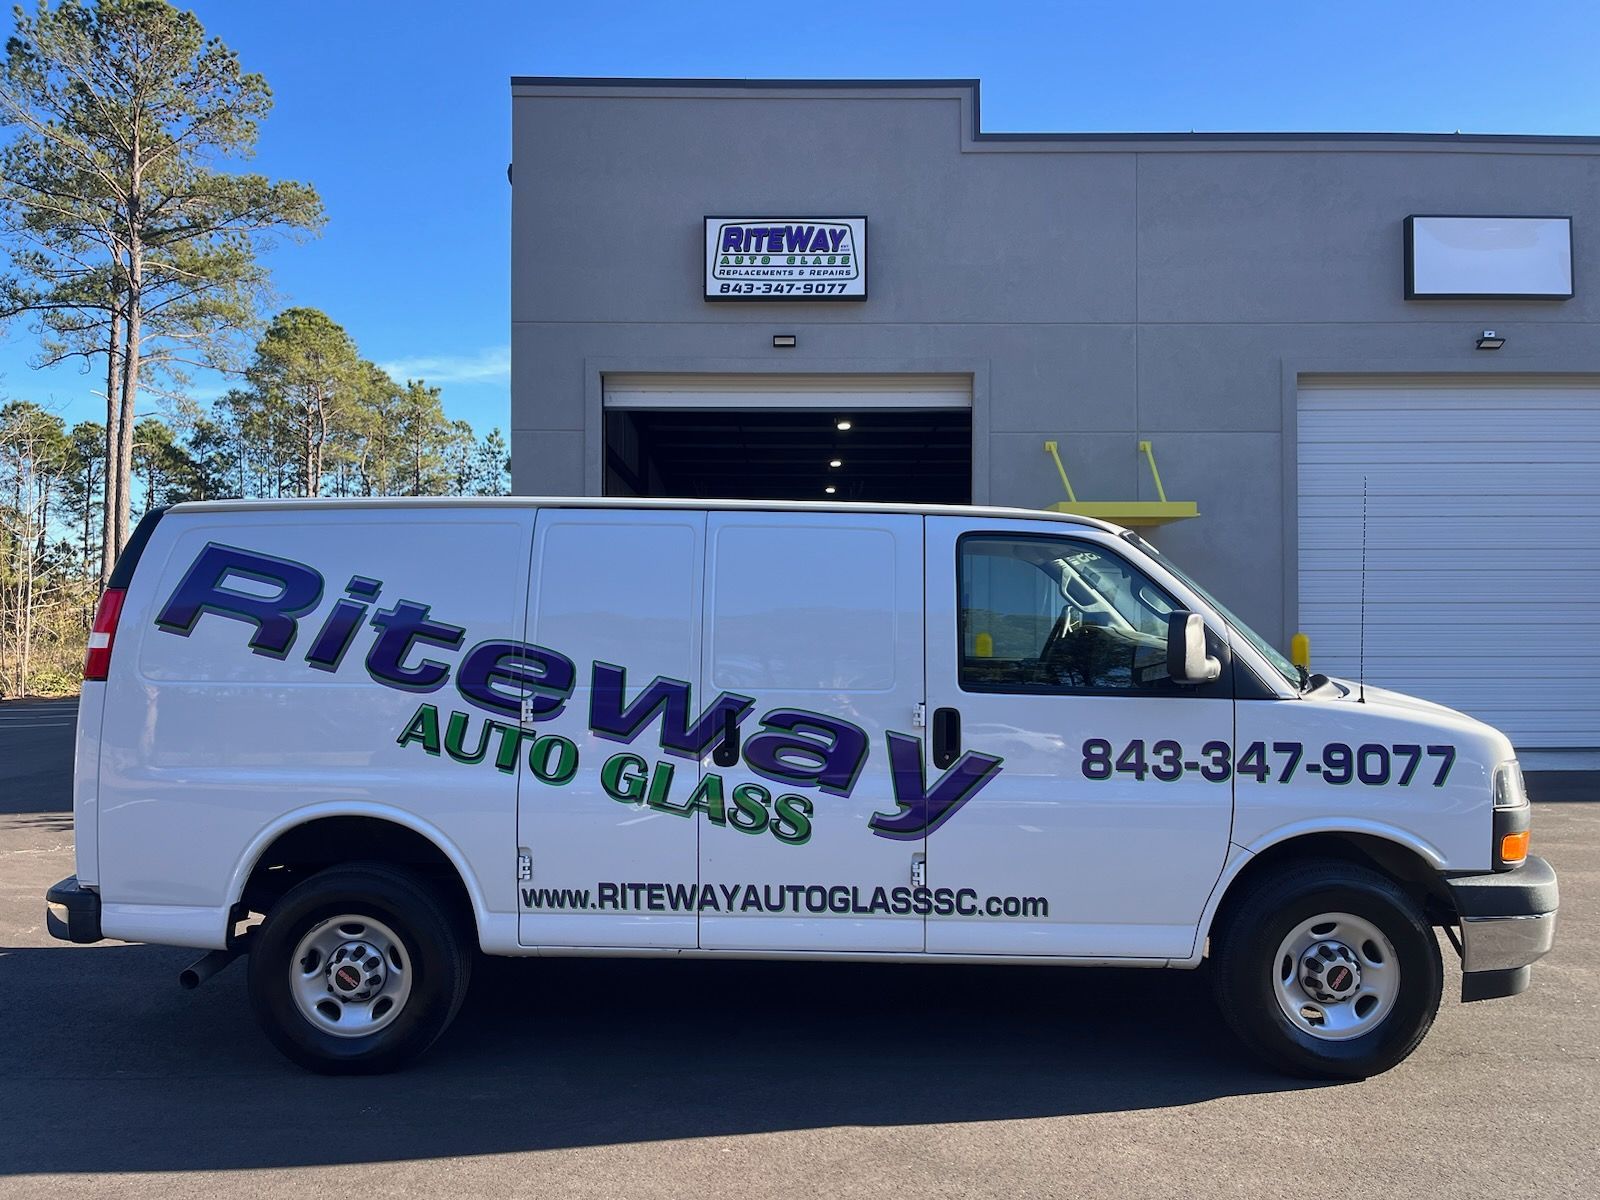 Riteway Auto Glass files insurance claims for our customers in Horry County